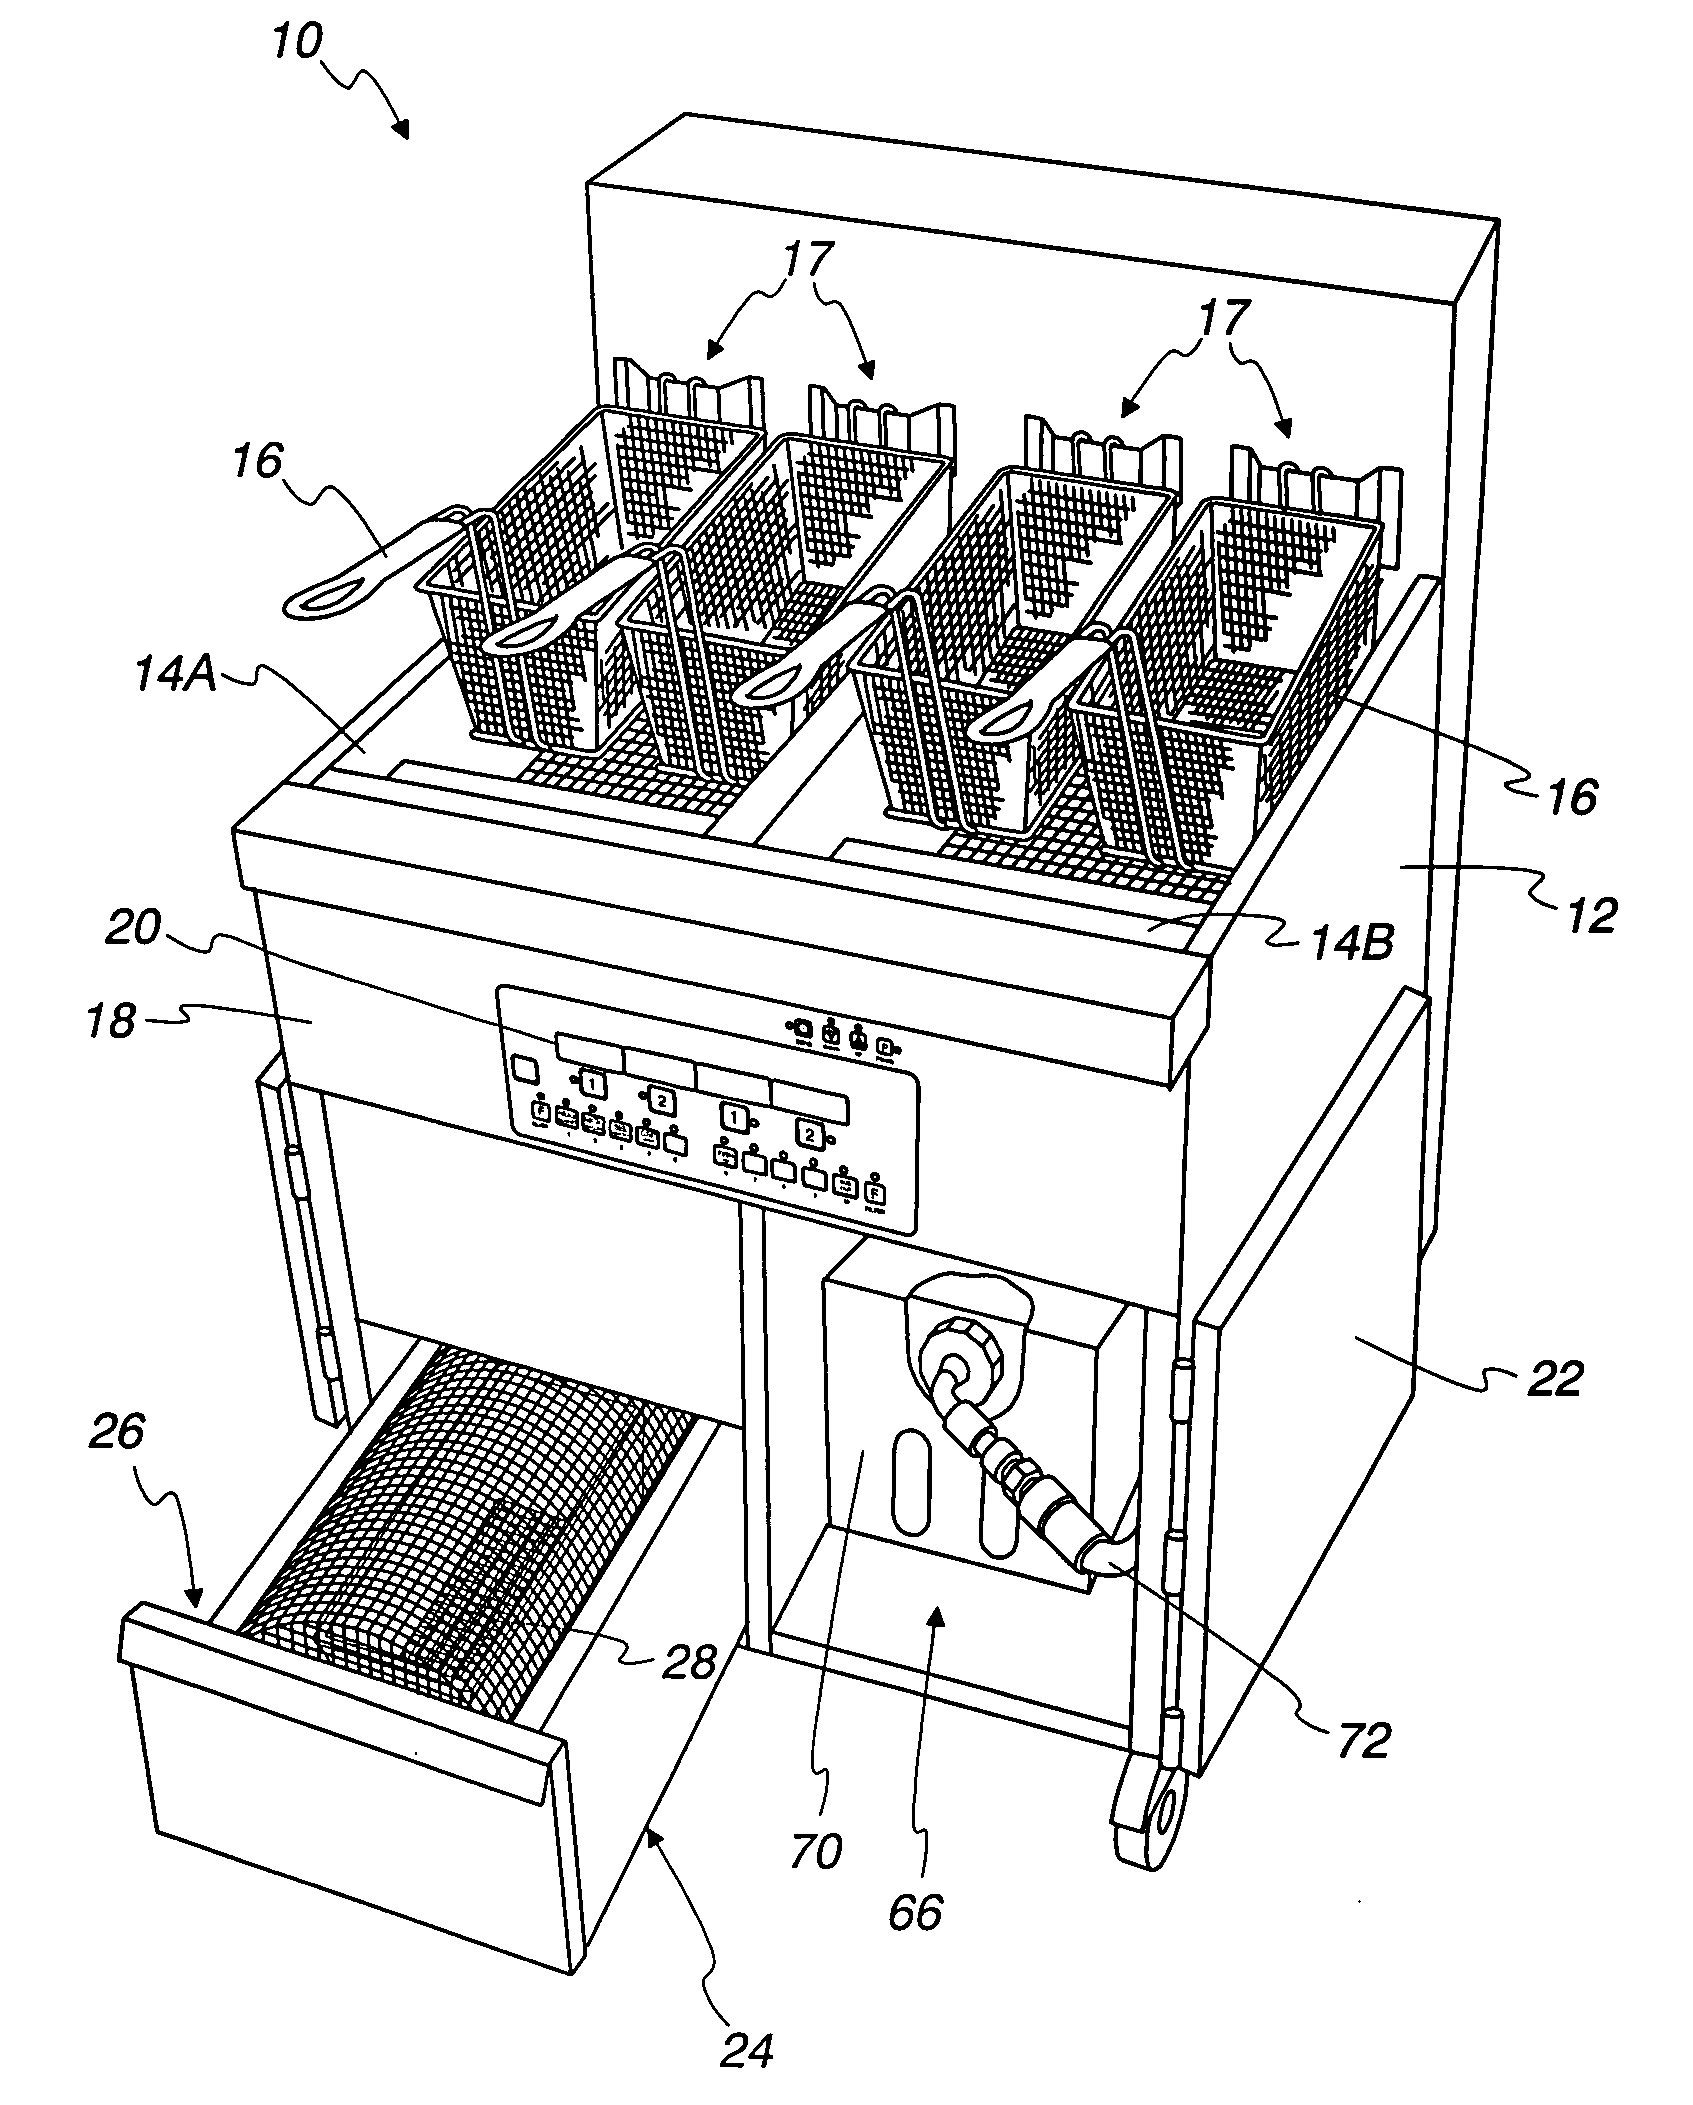 Low oil volume frying device and method